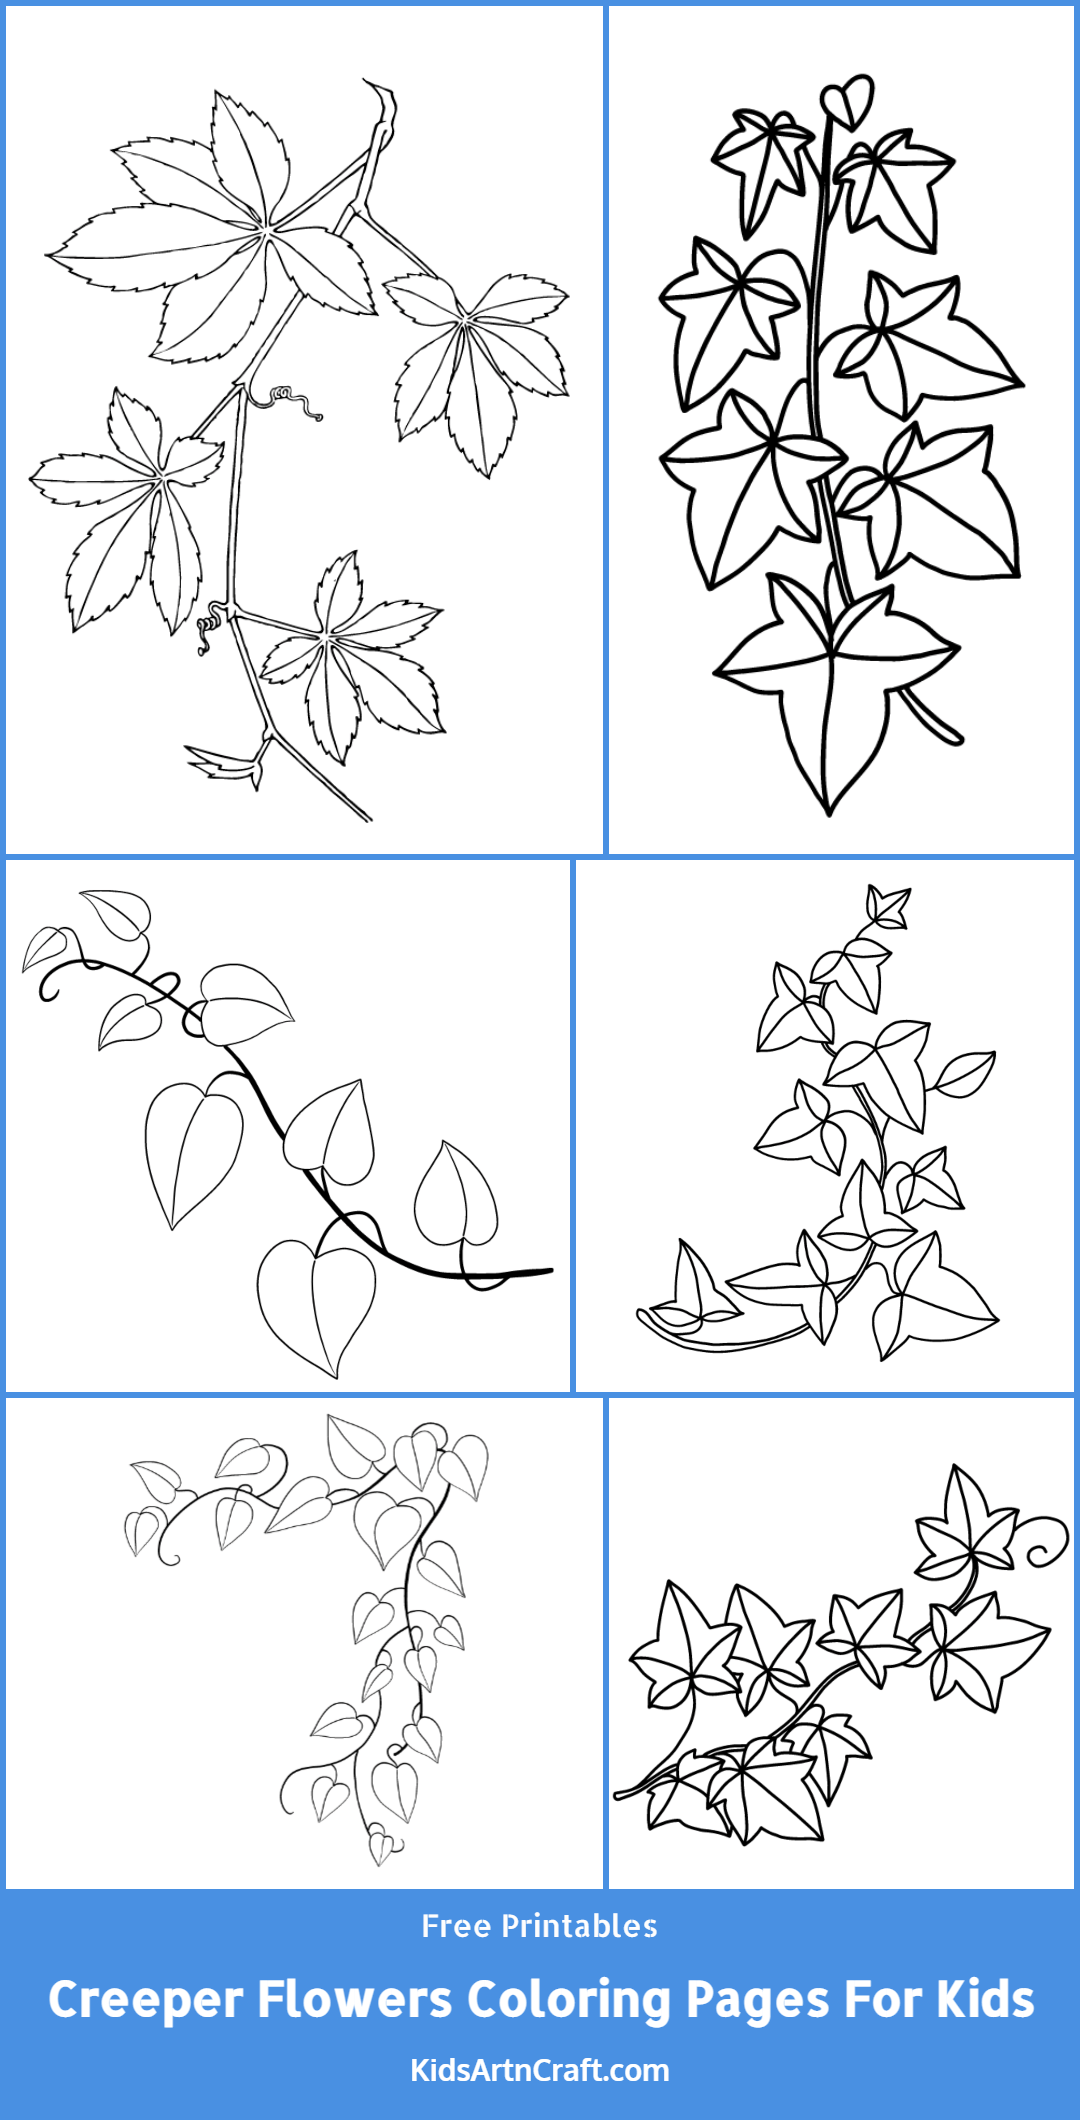 Creeper Flowers Coloring Pages For Kids – Free Printables